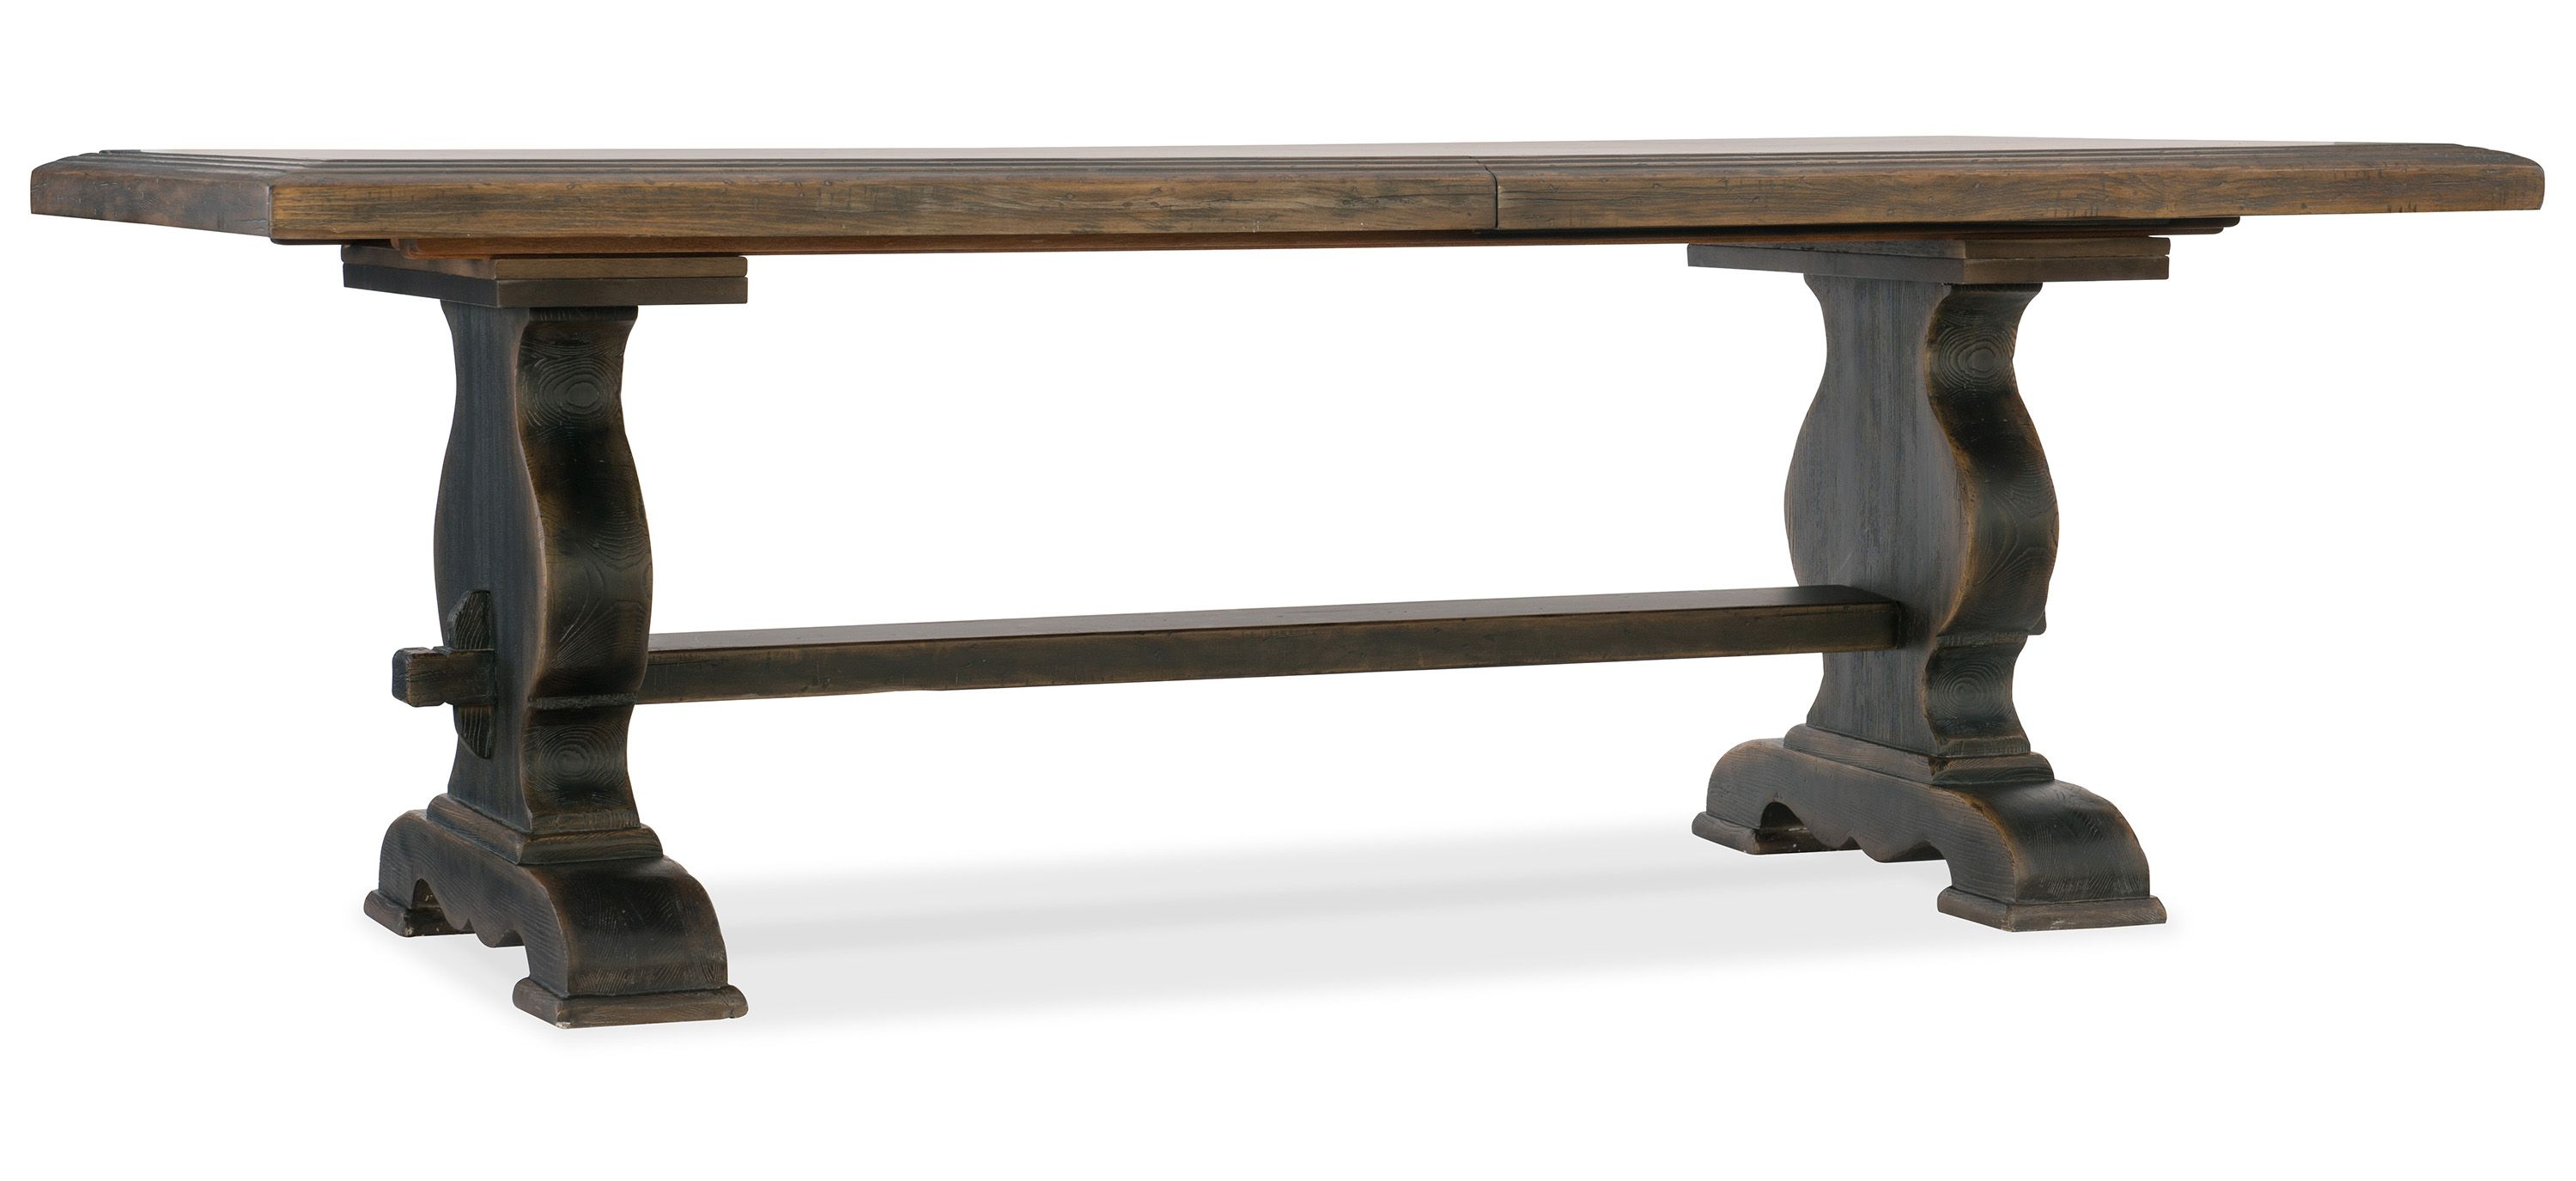 Hill Country Rectangular Dining Table with Two Leaves